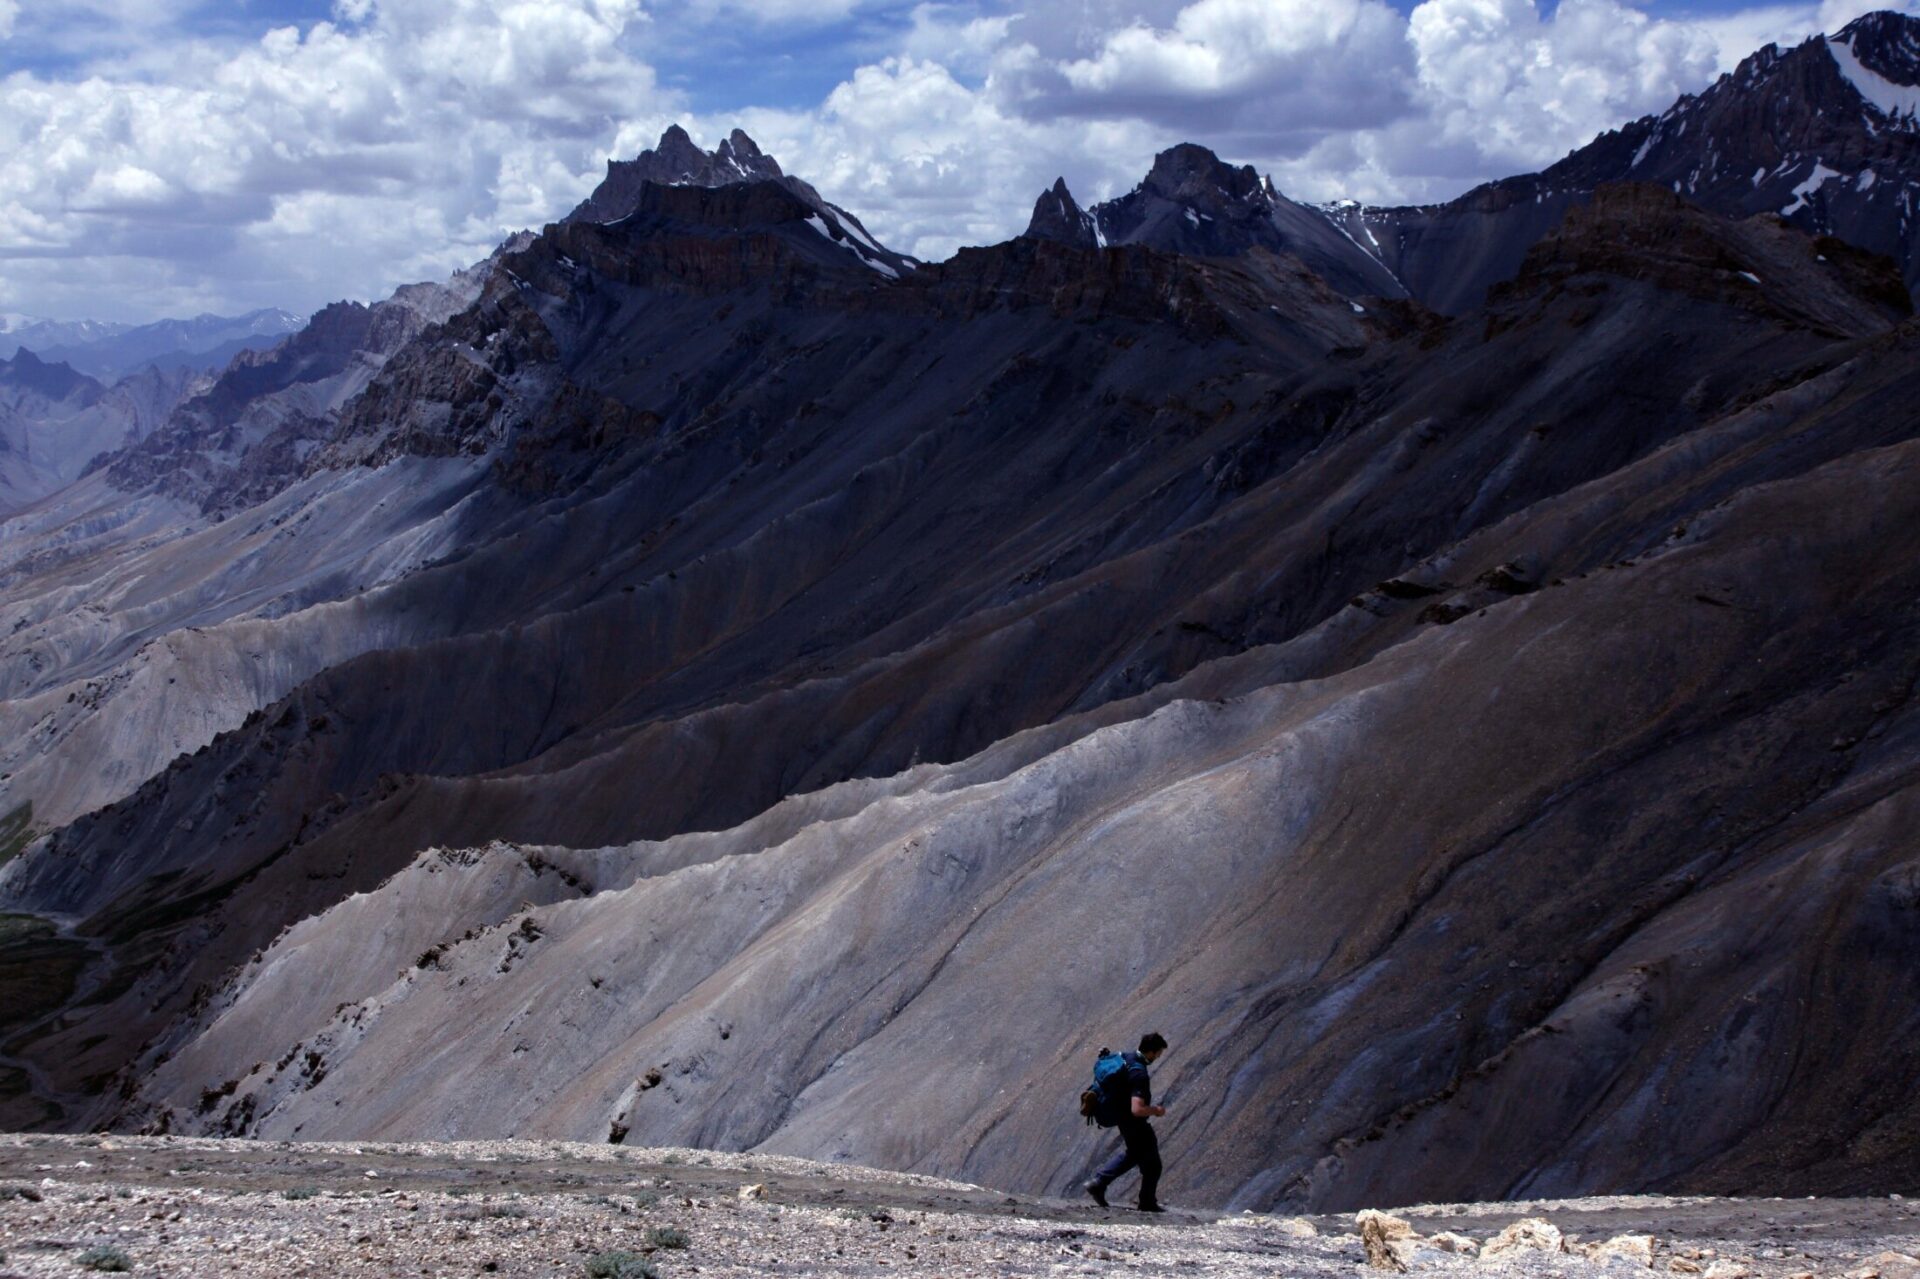 Descending the trail from the Zalung Karpo La (c5200 metres) into the uninhabited valley and massive limestone canyon system below, Rupshu region.